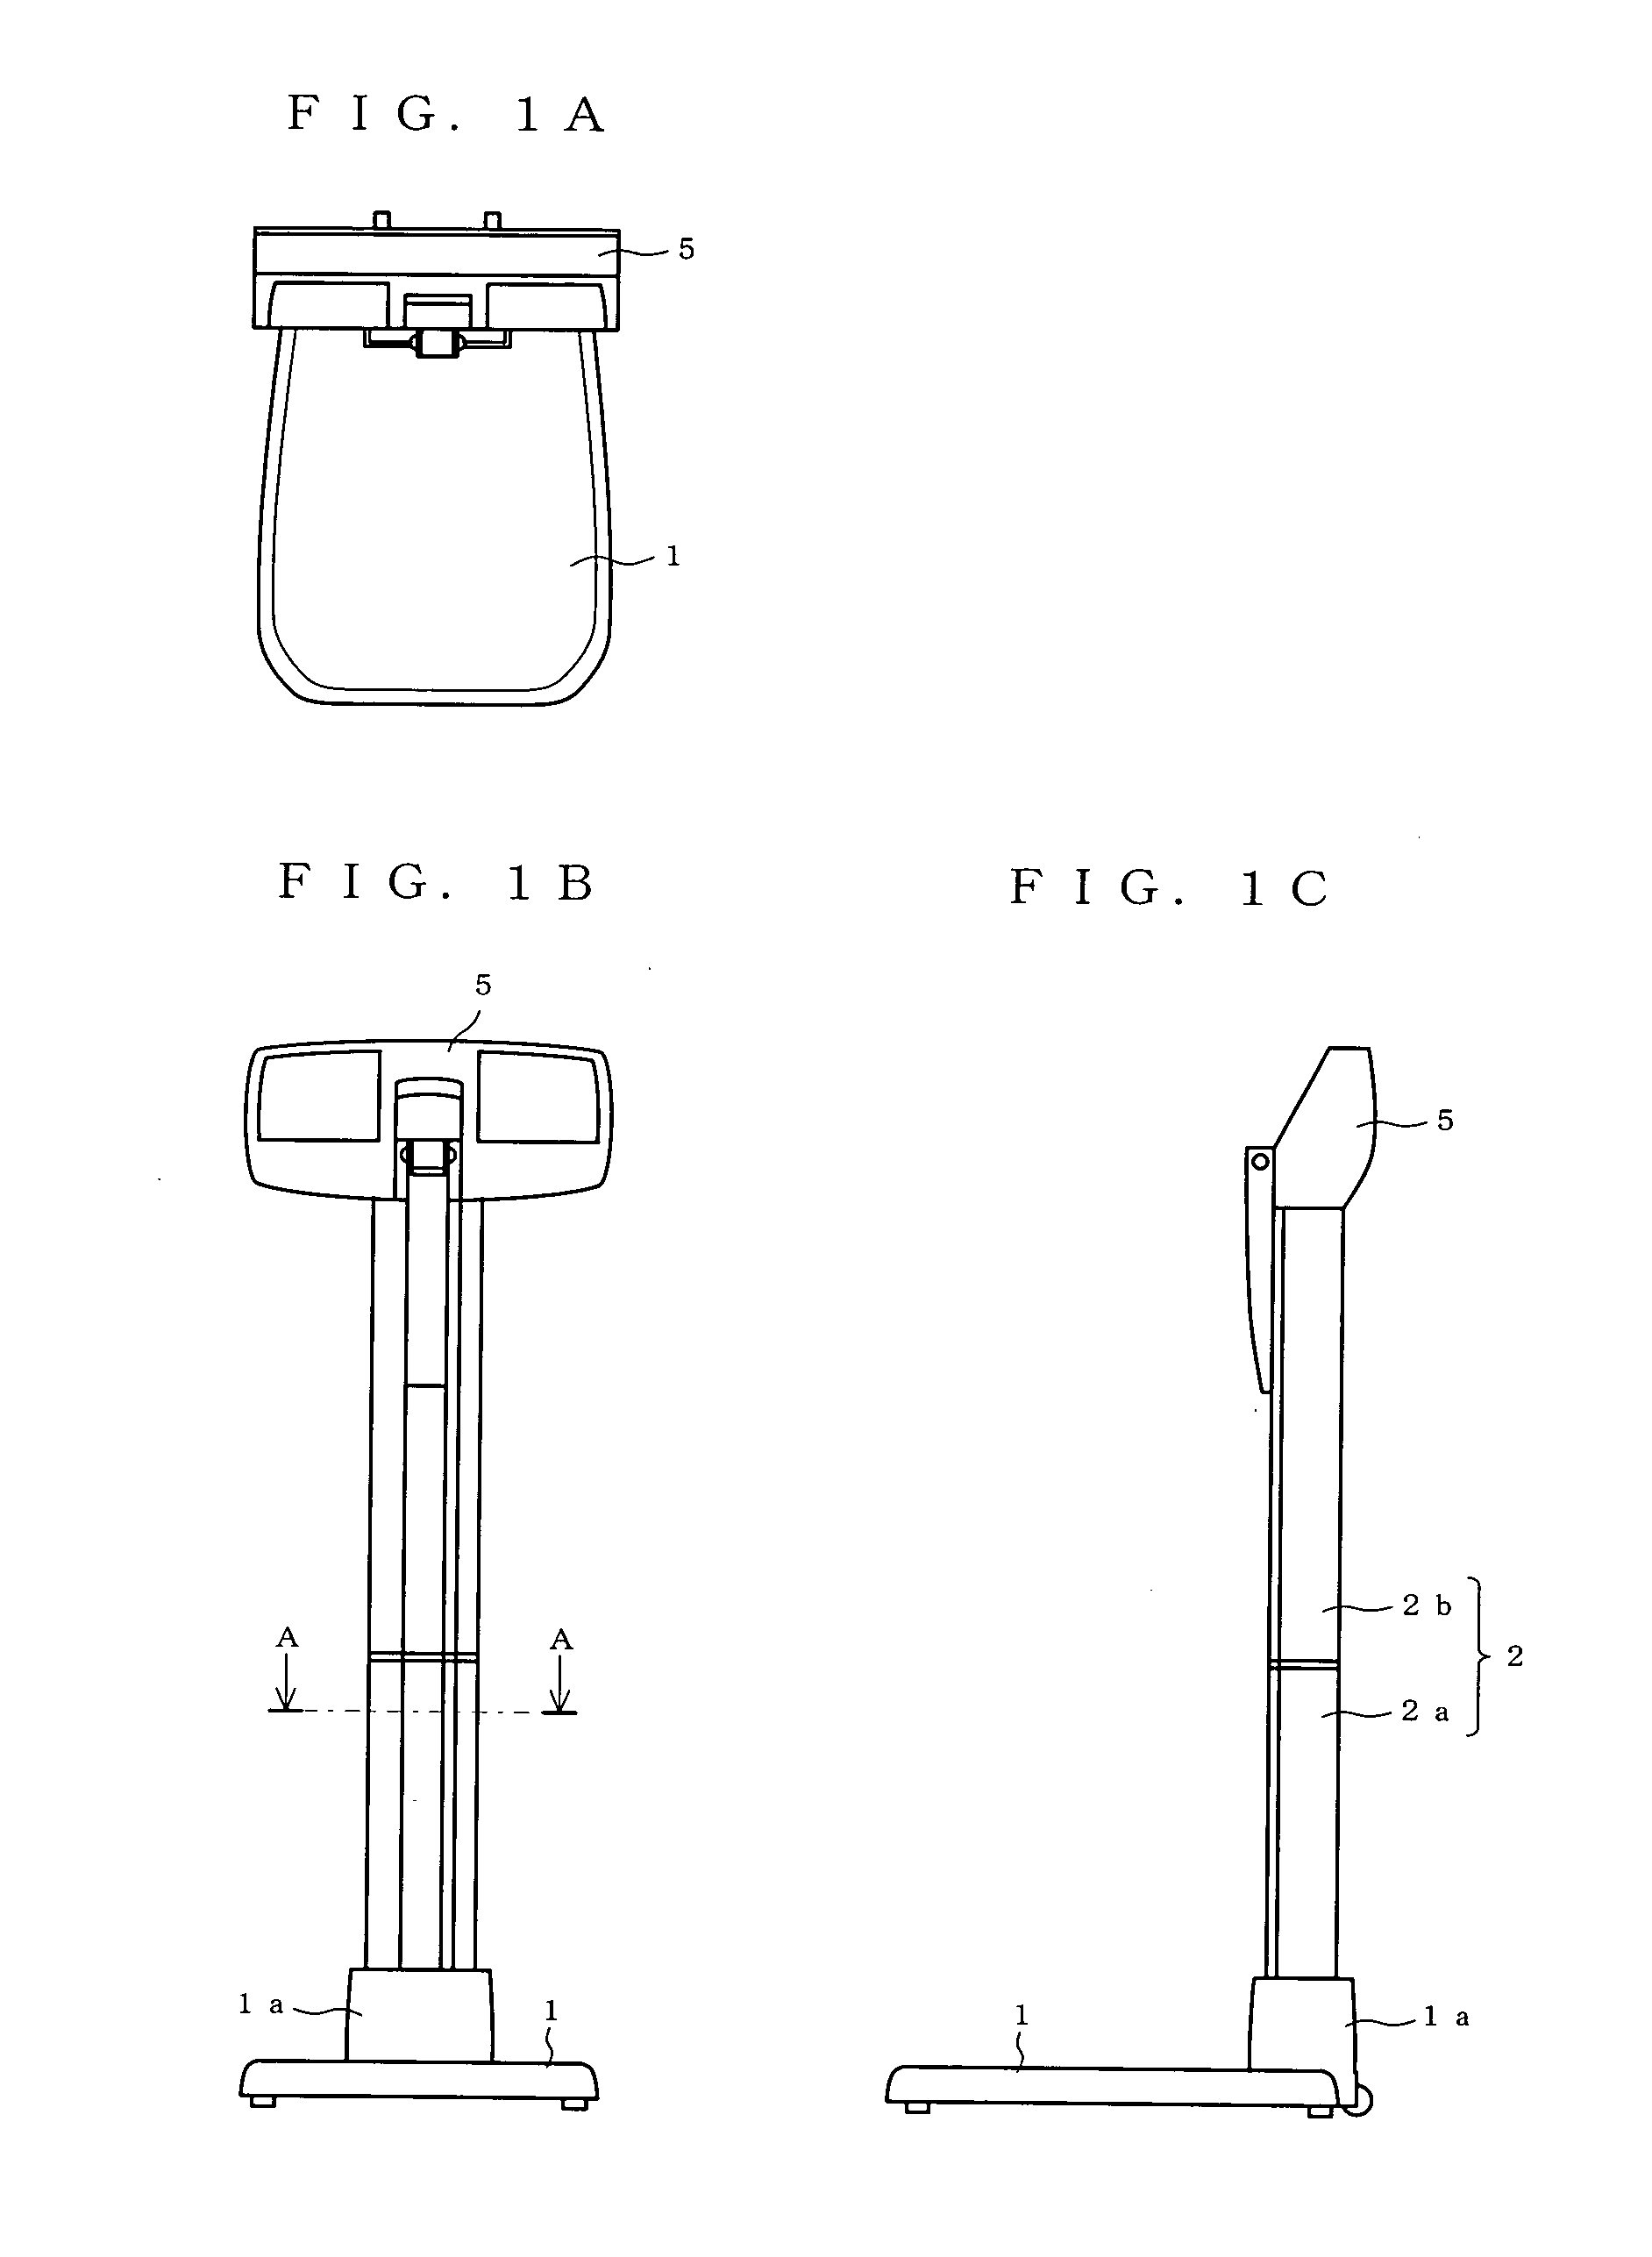 Height measuring apparatus and bioinstrumentation apparatus with height measuring device